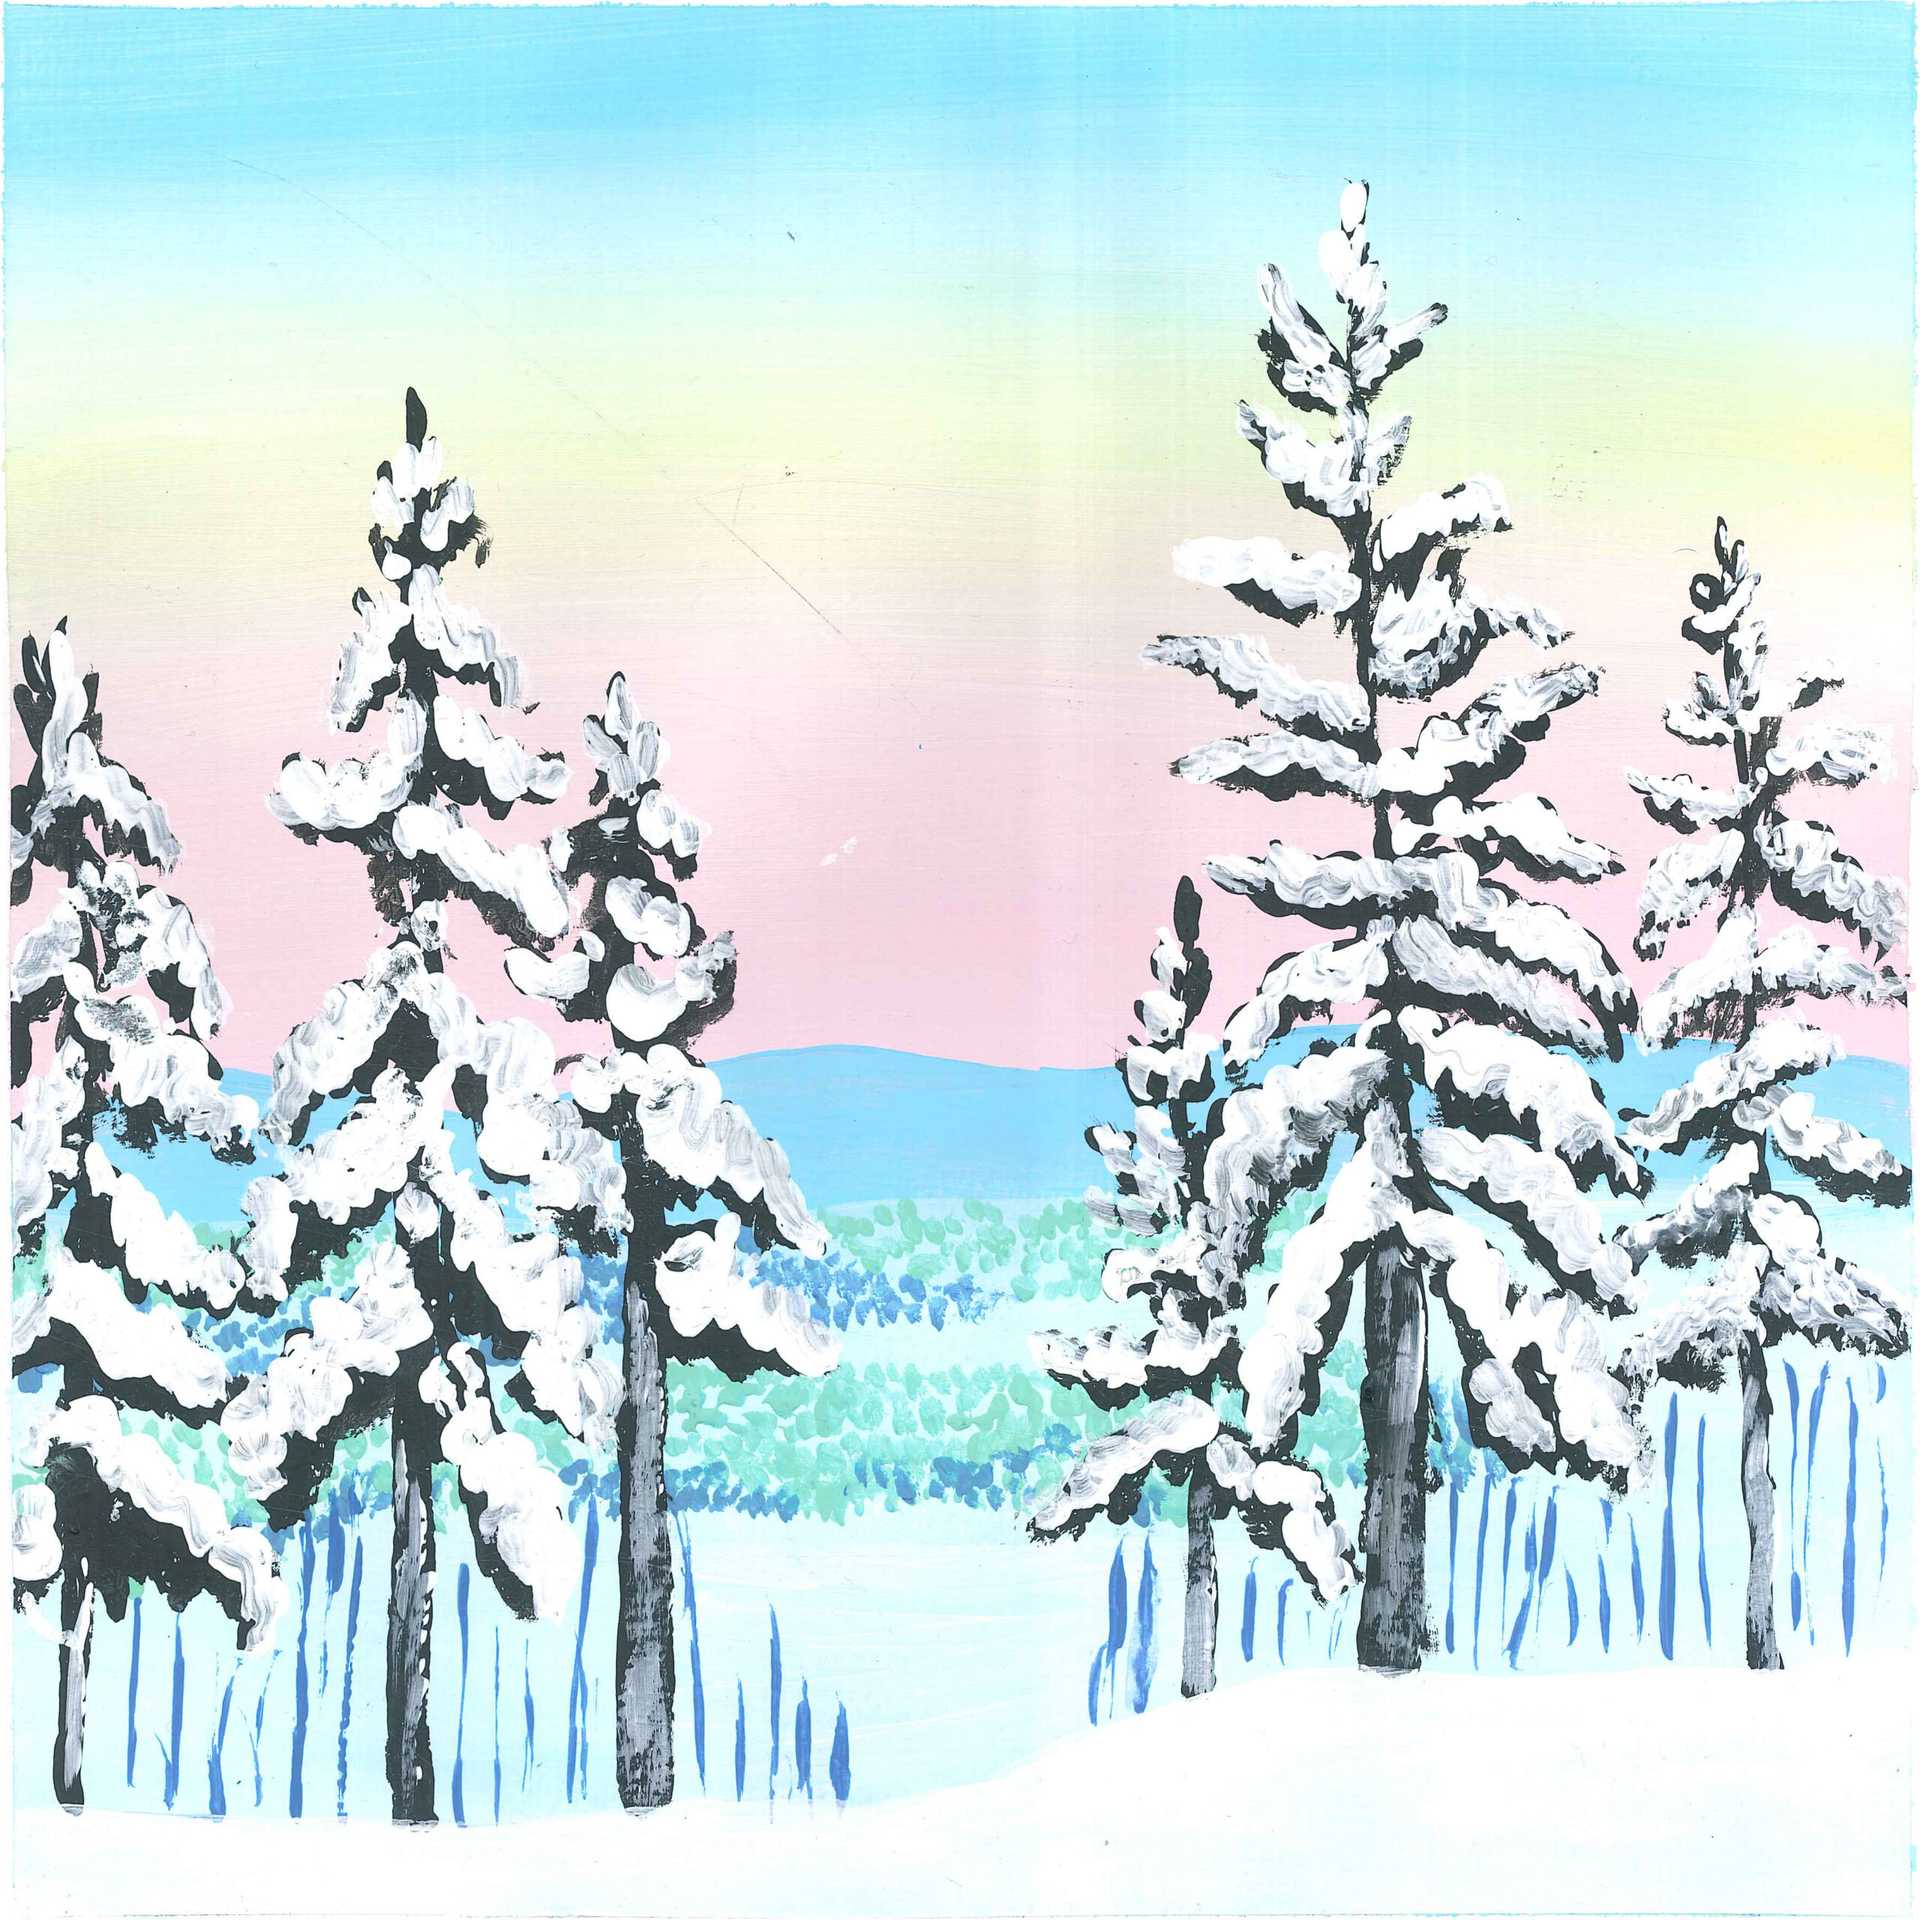 Snowing Ambience - nature landscape painting - earth.fm